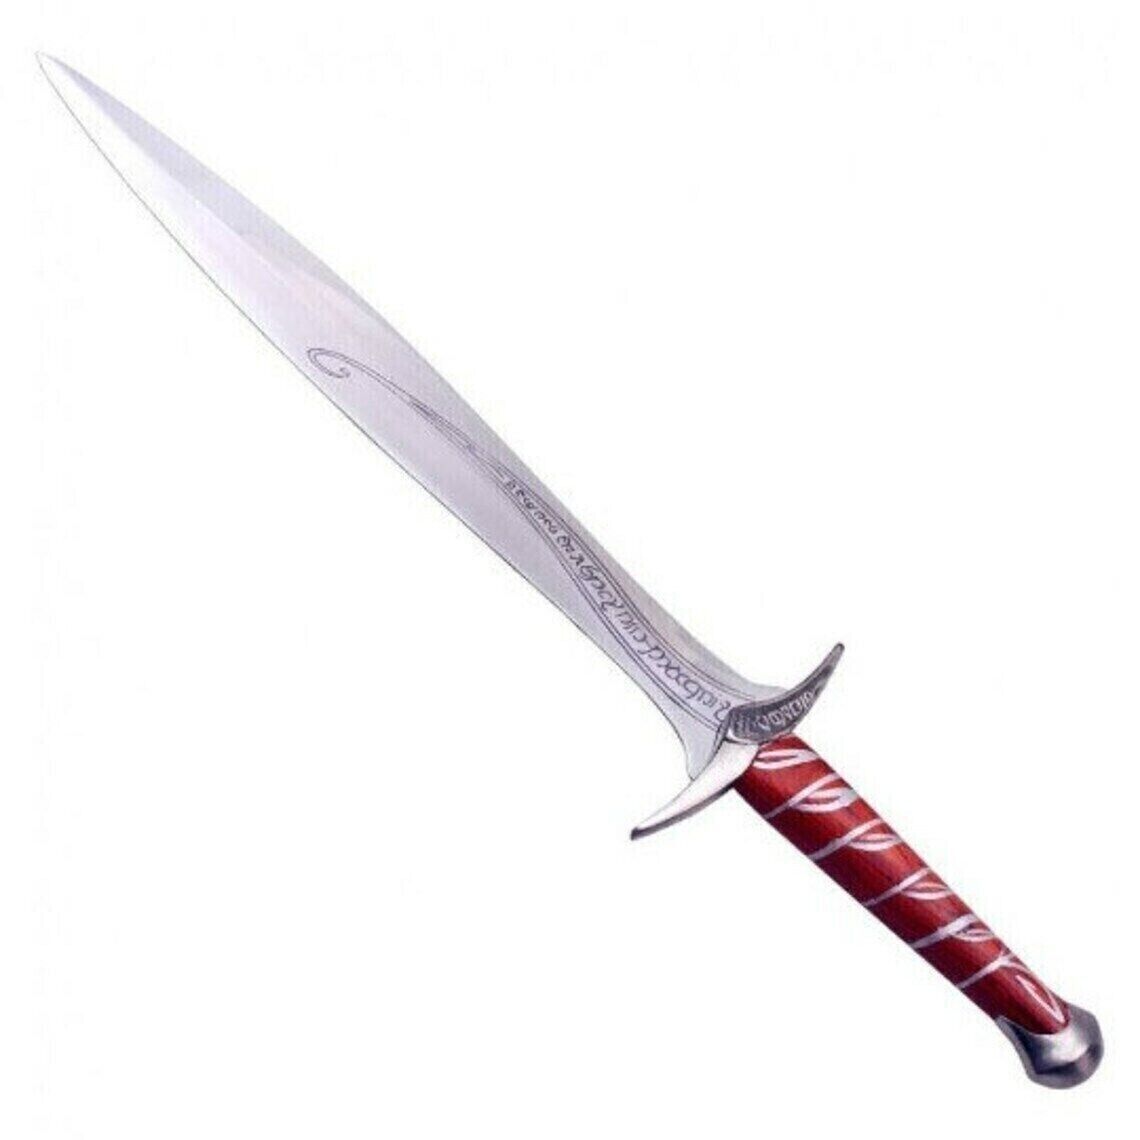 Handmade Hobbit Sting Sword Replica from Lord of the Rings (LOTR